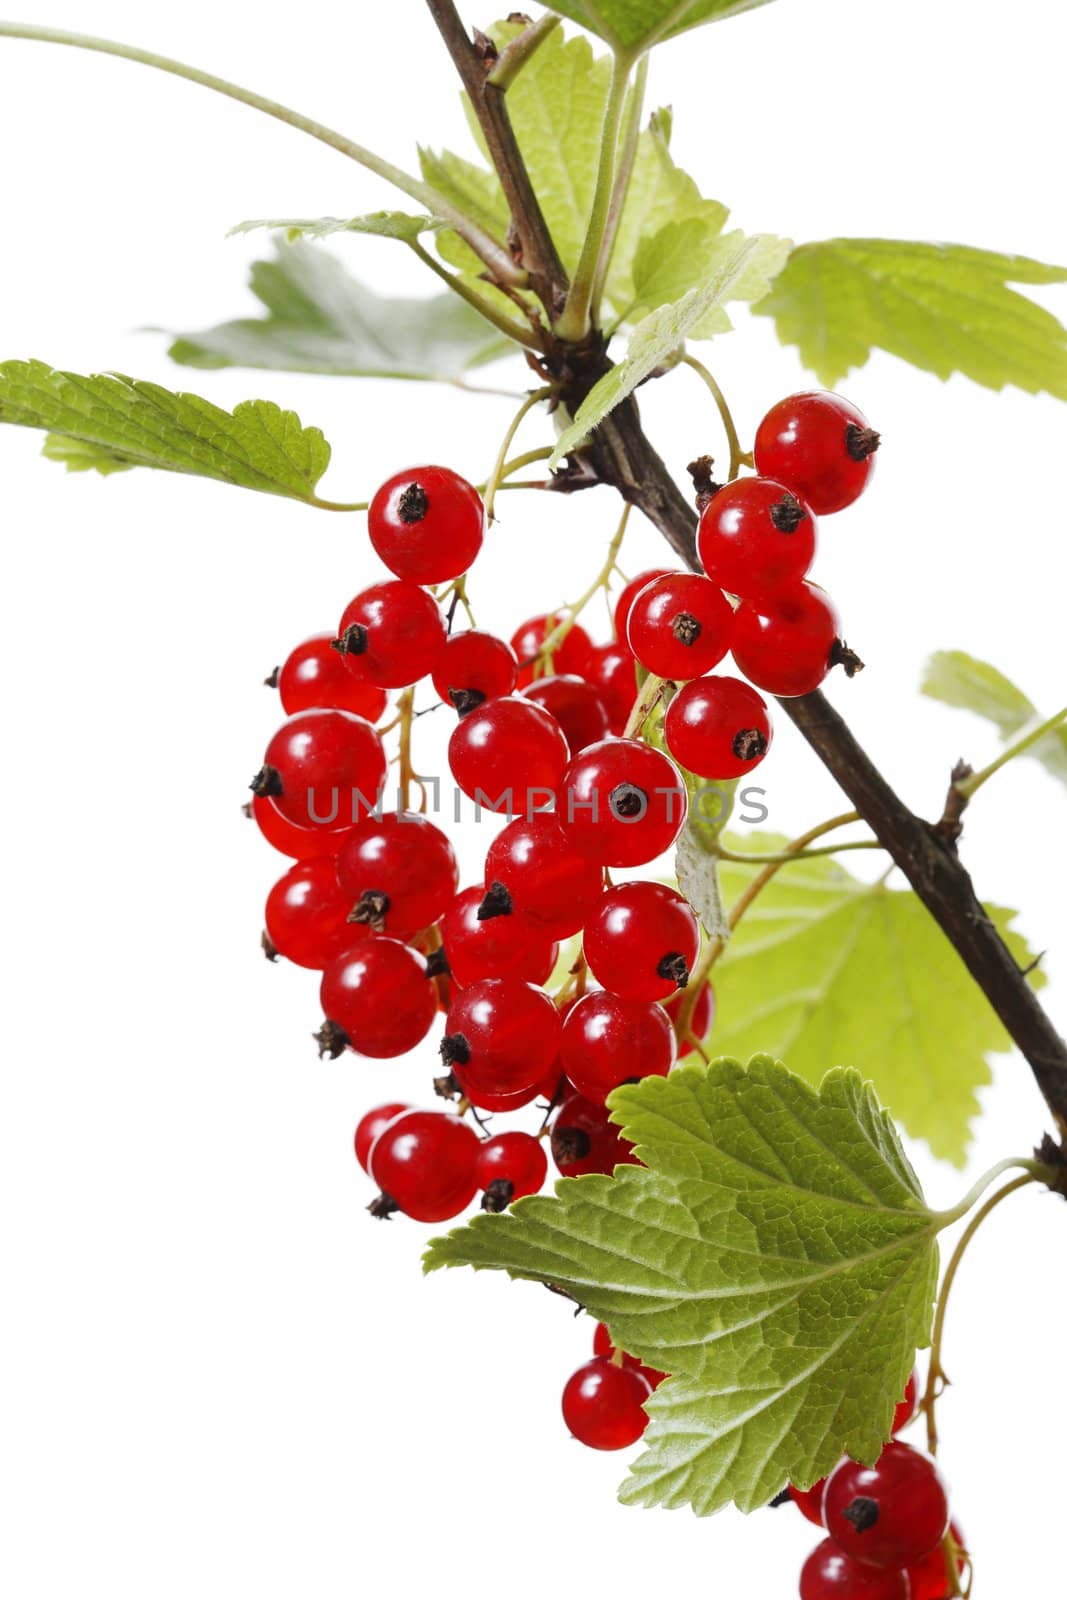 Redcurrant (Ribes rubrum) berries growing on a branch.